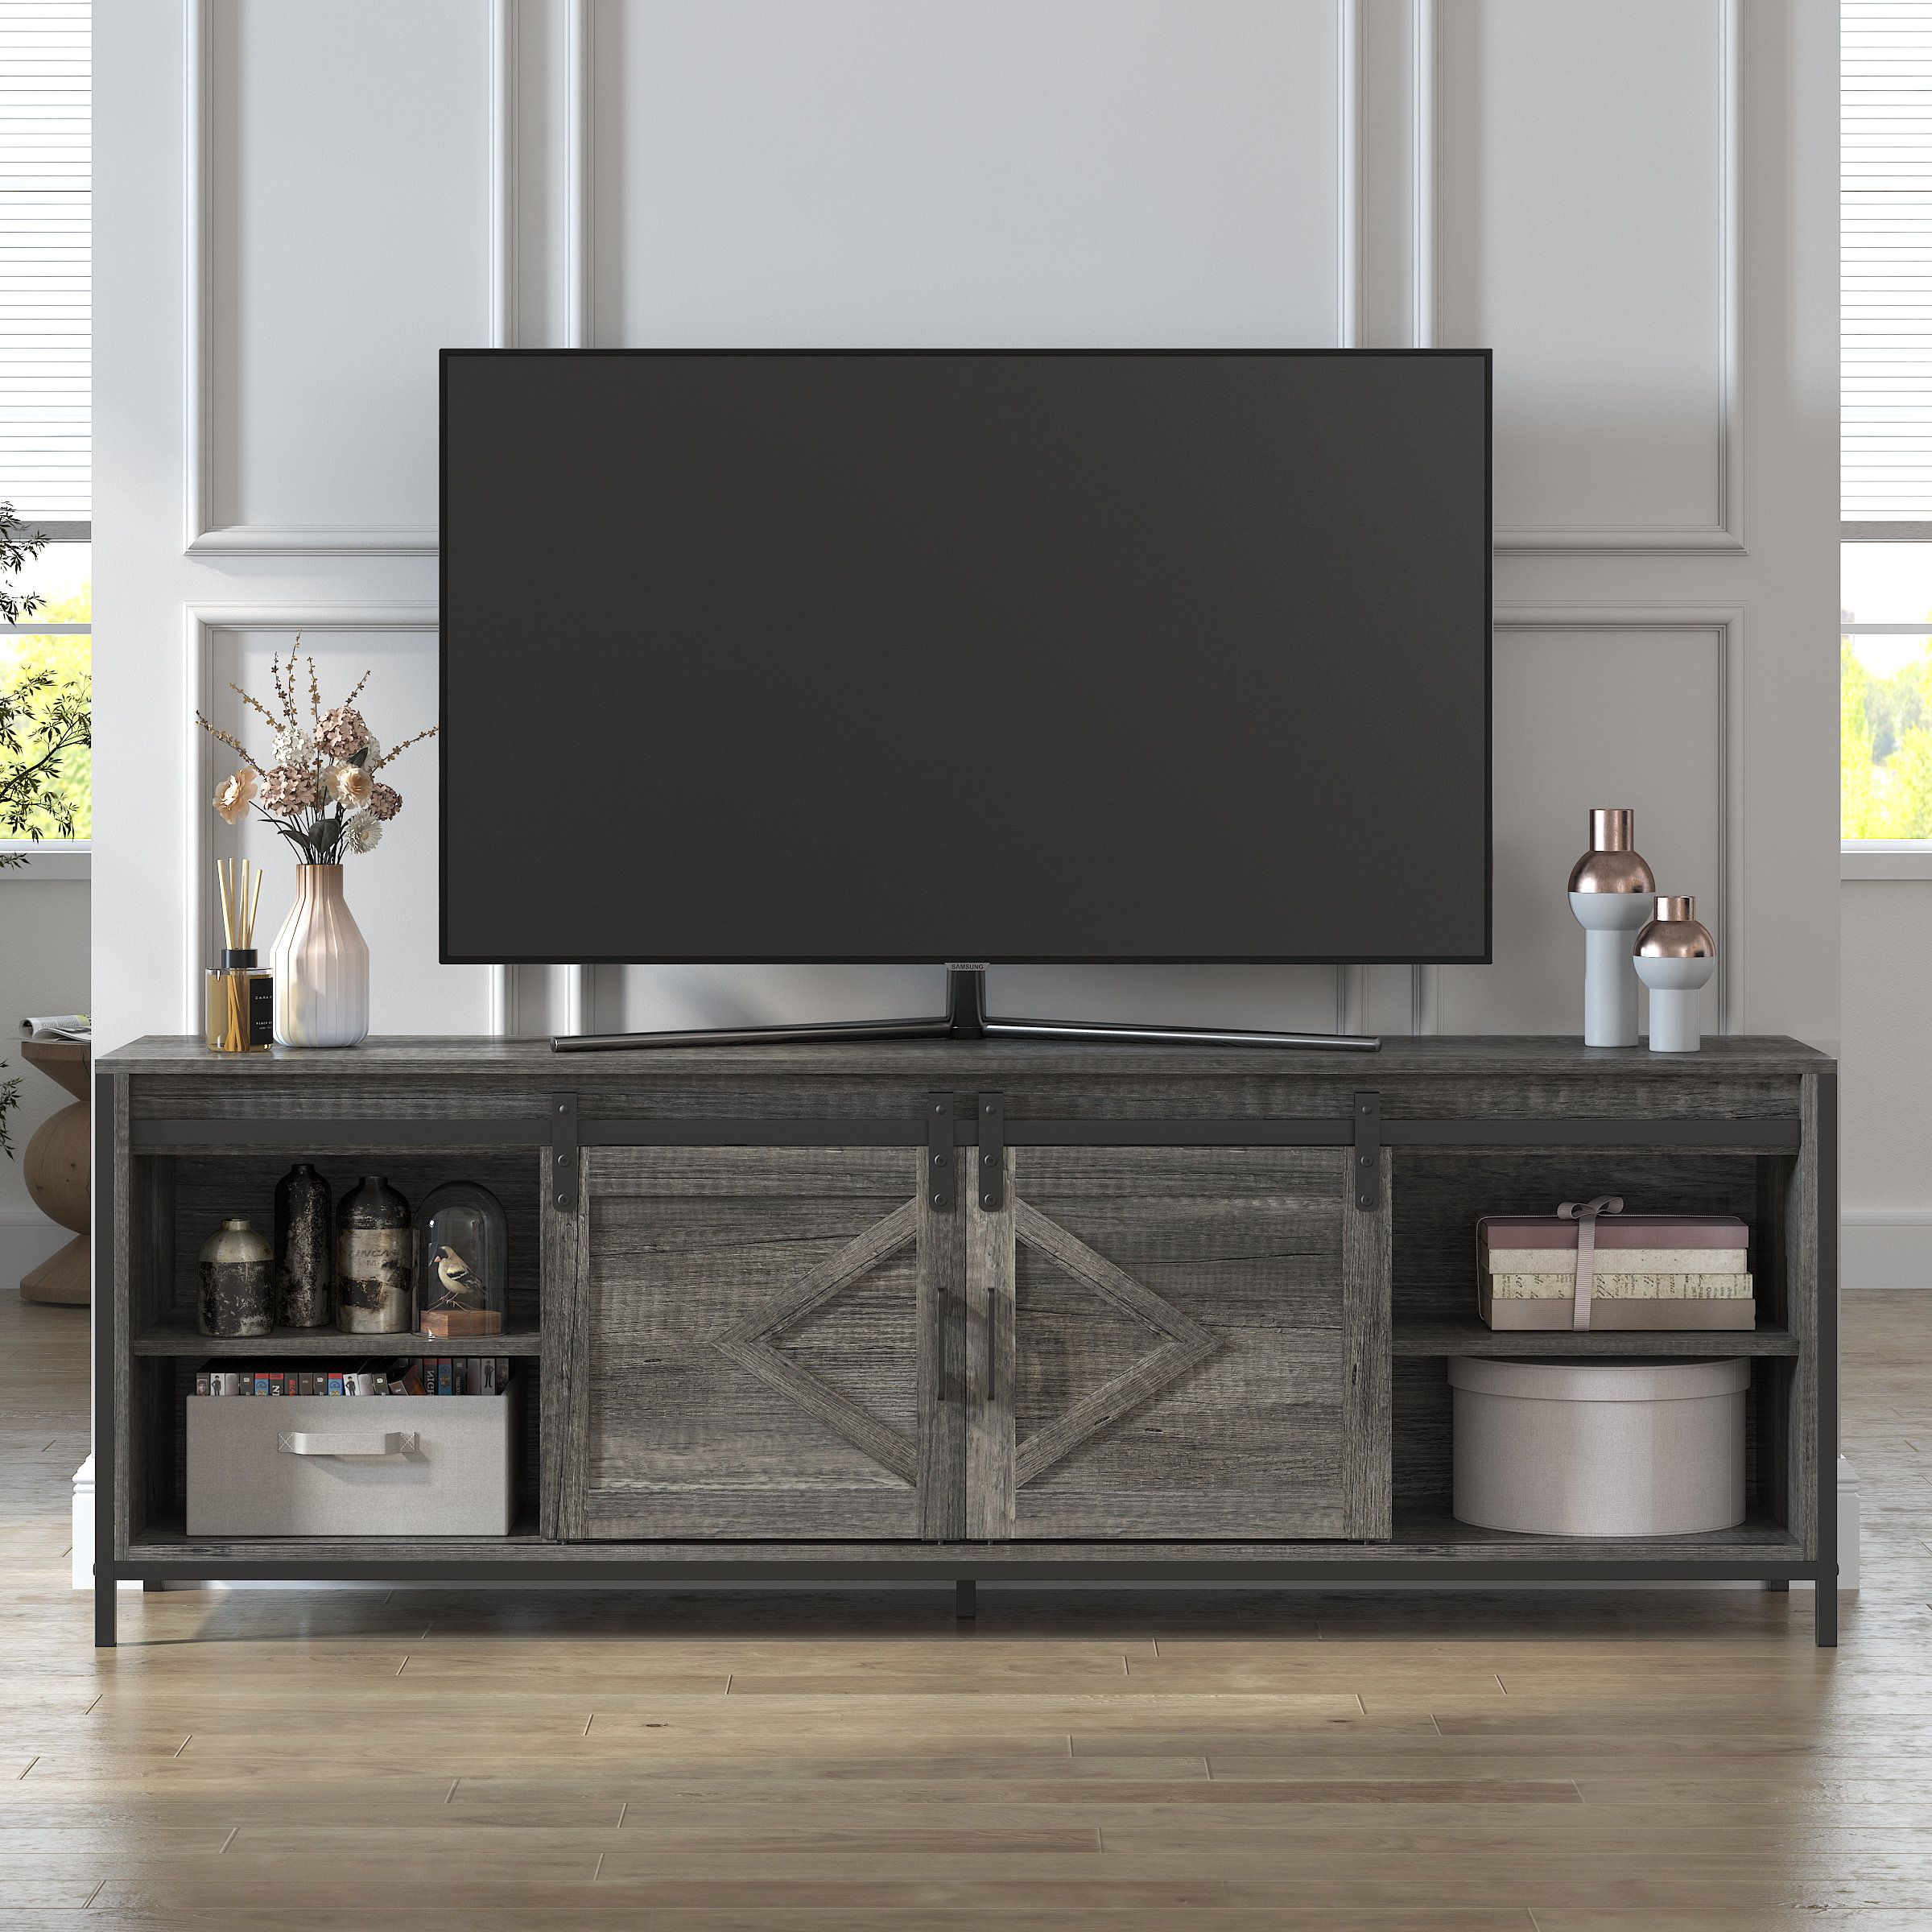 Gracie Oaks 60 Inches Modern Farmhouse Barn Door Tv Stand Up To 70" |  Wayfair Intended For Modern Farmhouse Barn Tv Stands (View 14 of 15)